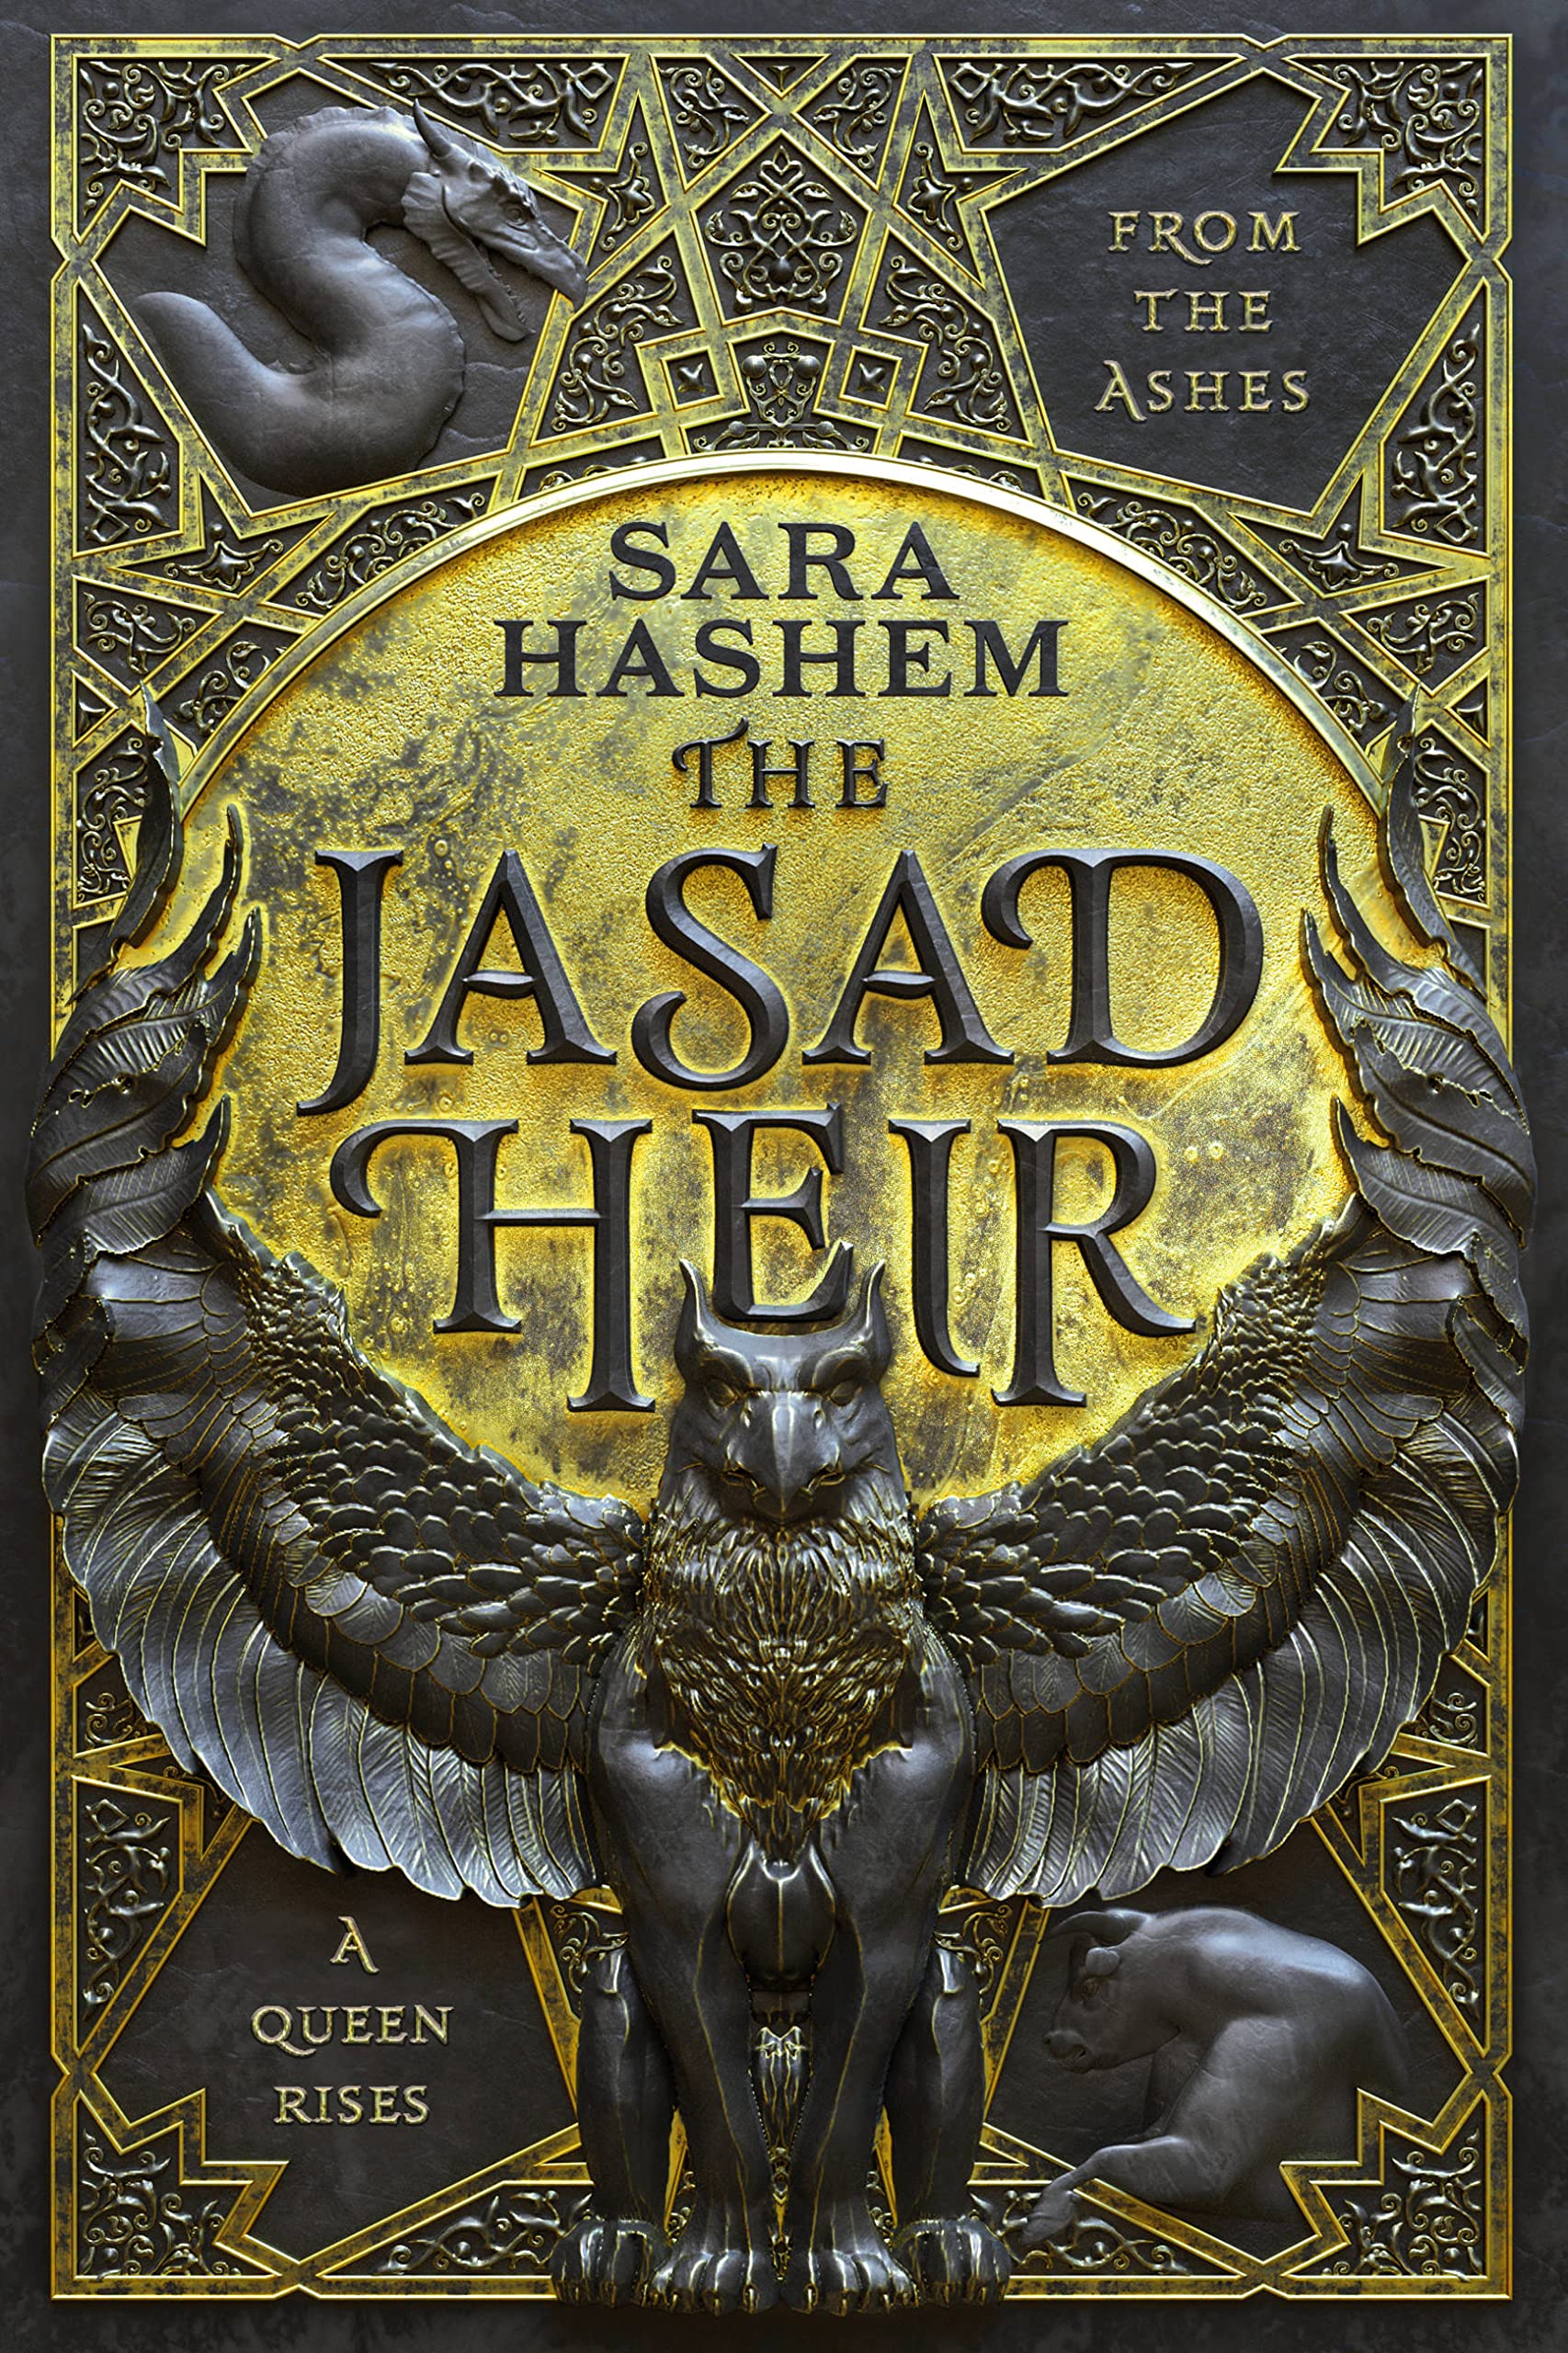 The Jasad Heir (The Scorched Throne) by Sara Hashem